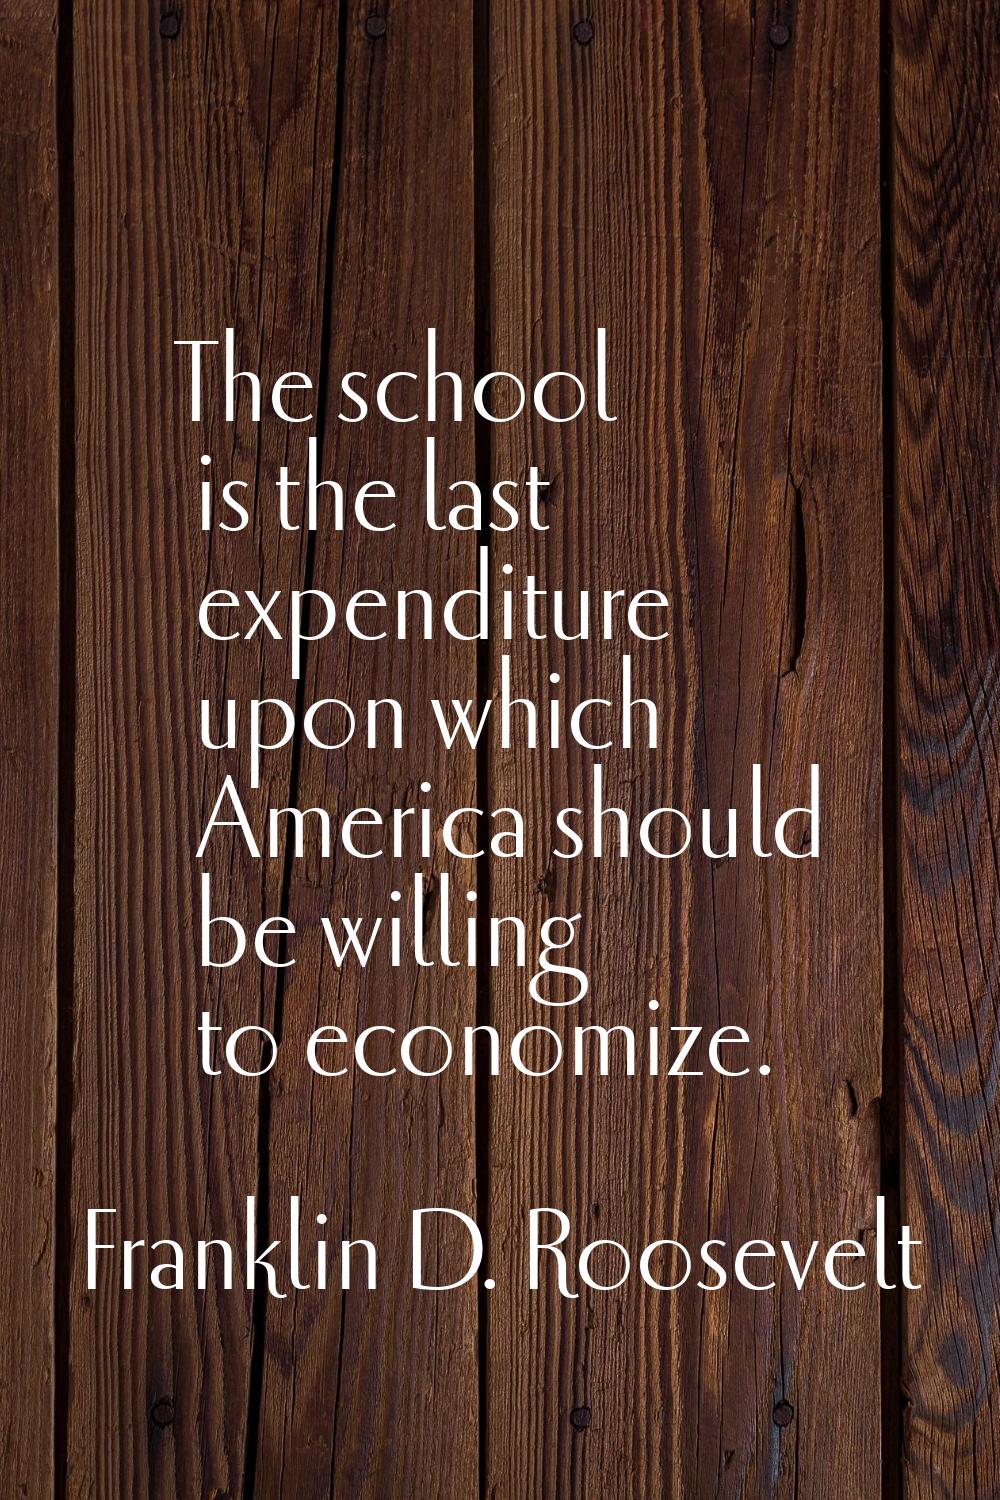 The school is the last expenditure upon which America should be willing to economize.